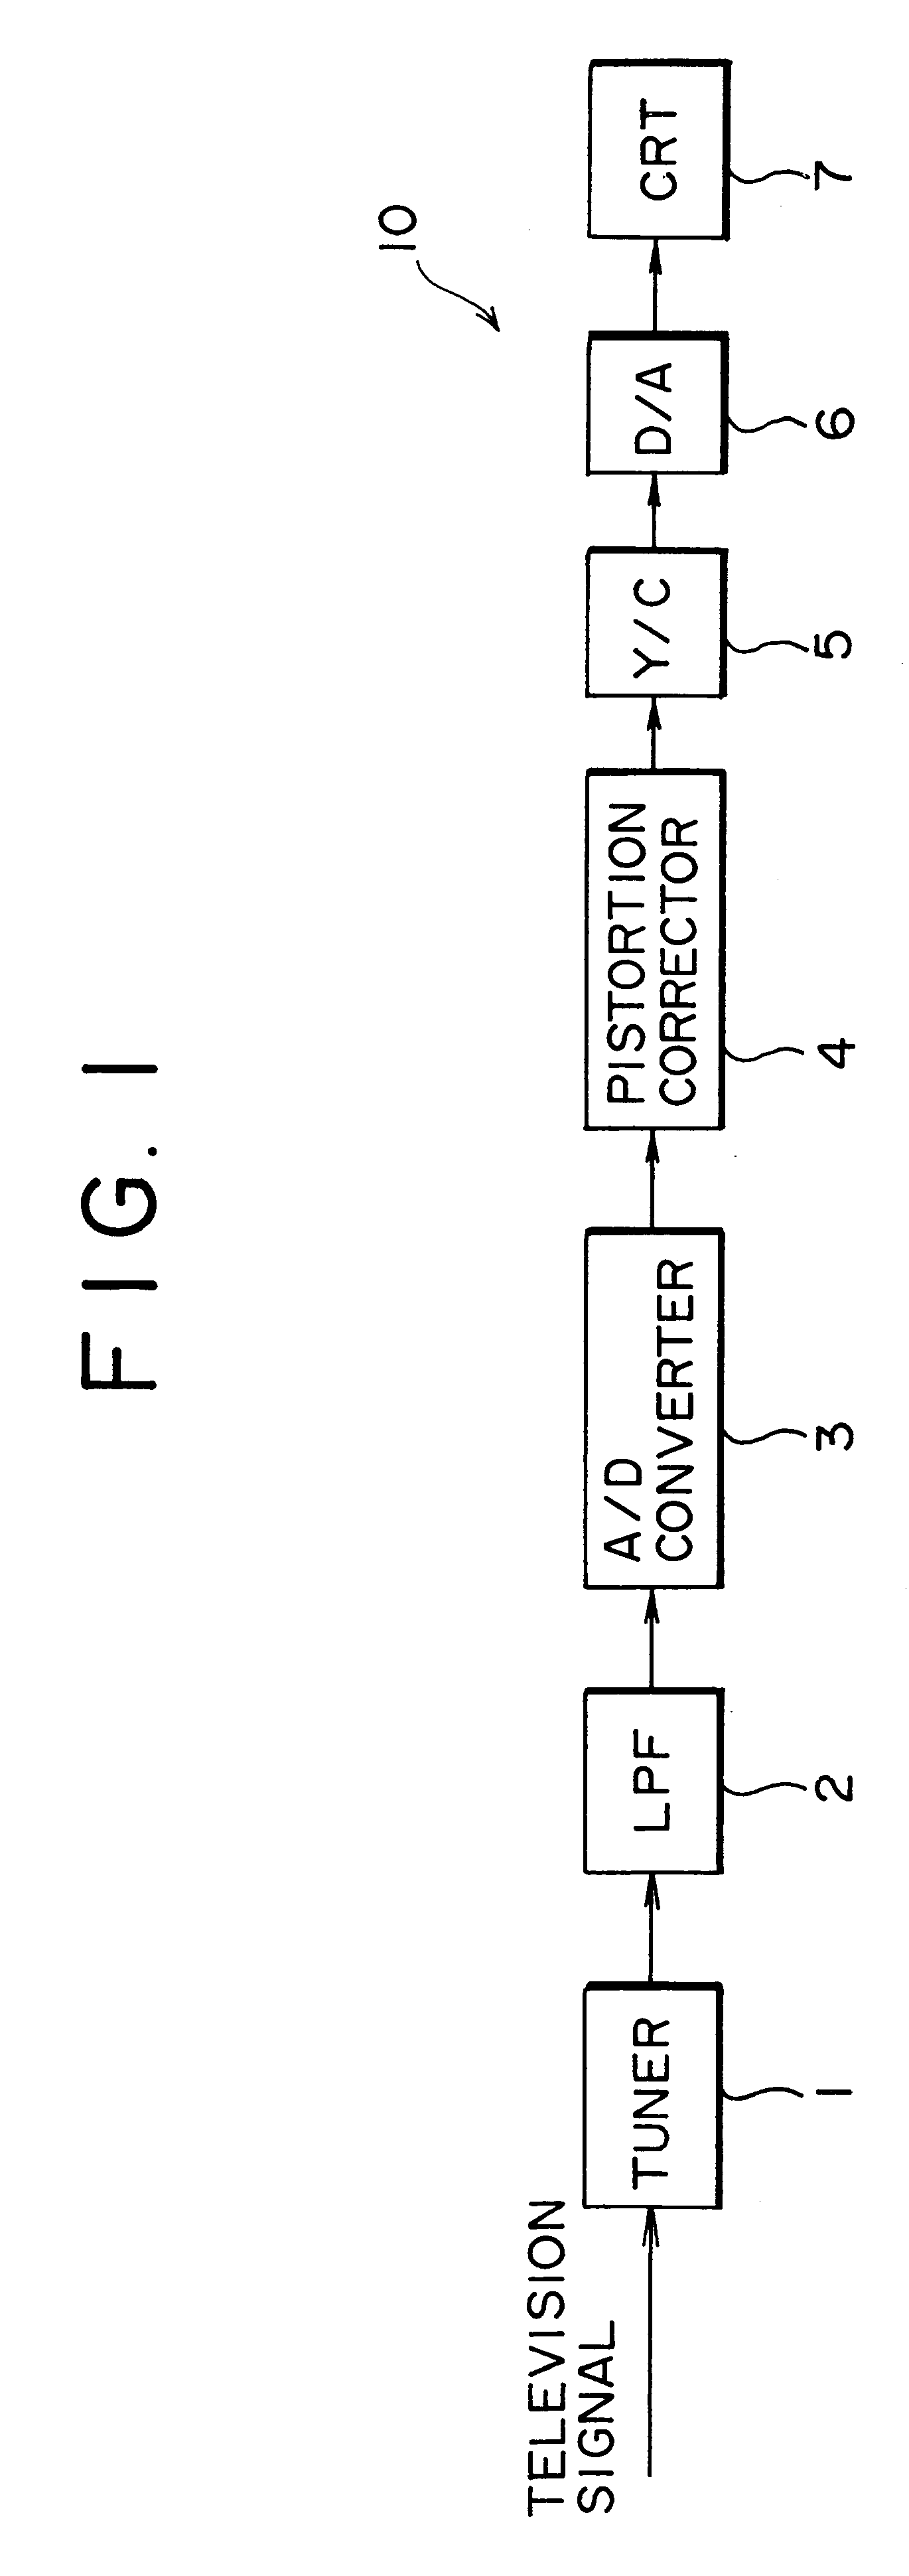 Image processing device and method employing motion detection to generate improved quality image from low resolution image